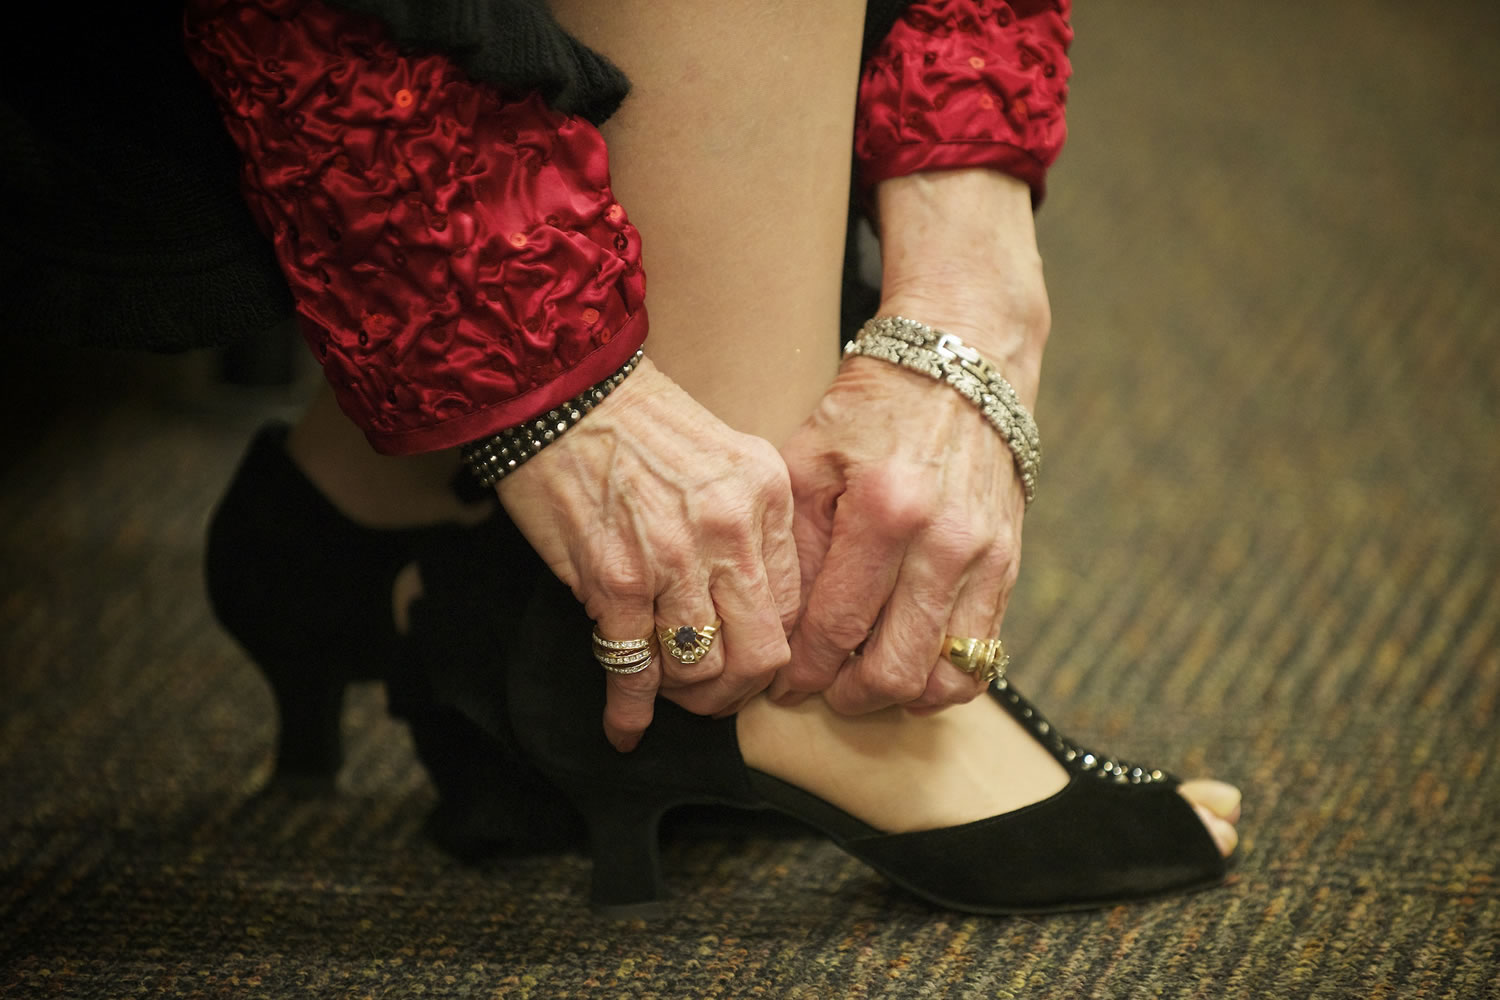 Barbara Scherr of Vancouver puts her dancing shoes on before the Swinging in the New Year&#039;s Eve Dance in 2013 in Vancouver.